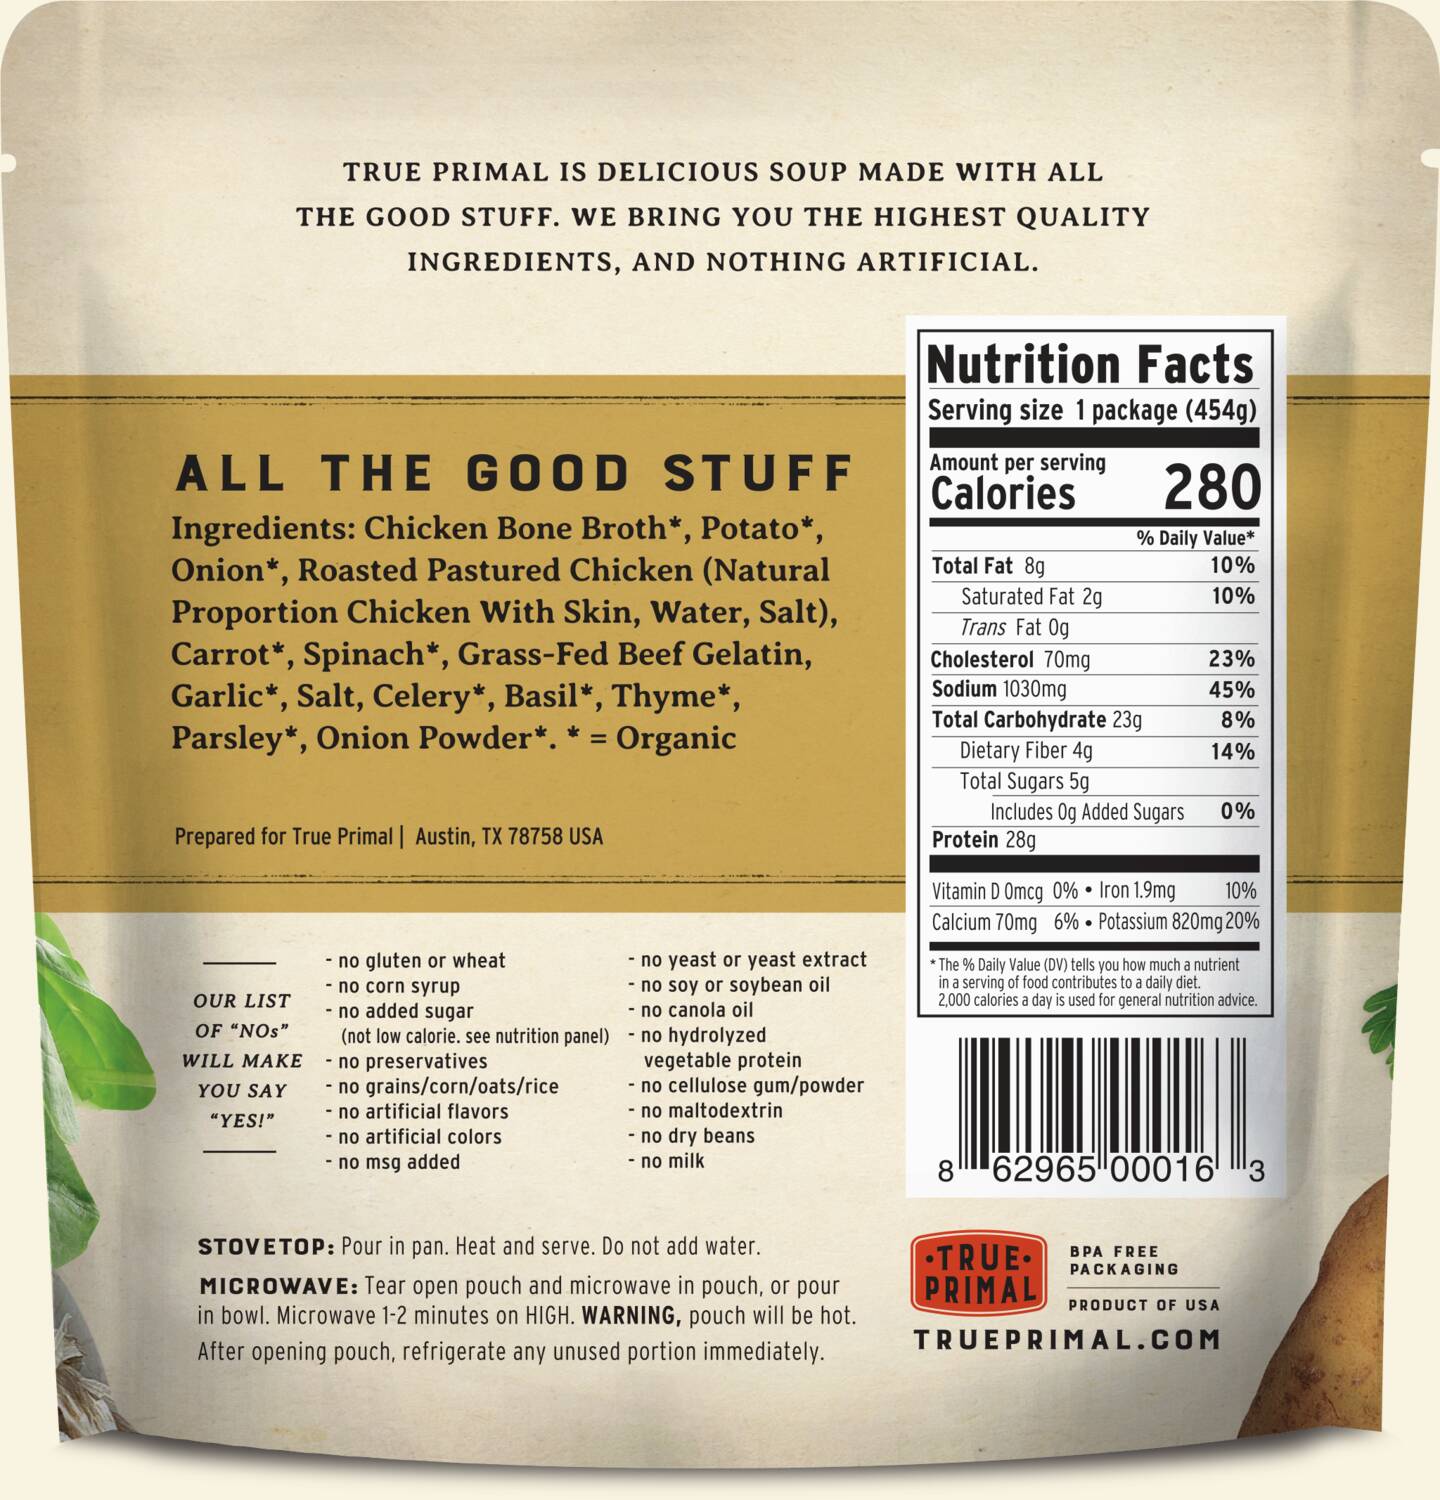 True Primal Tuscan-Style Chicken Soup in pouch, back of label. UPC: 862965000163.